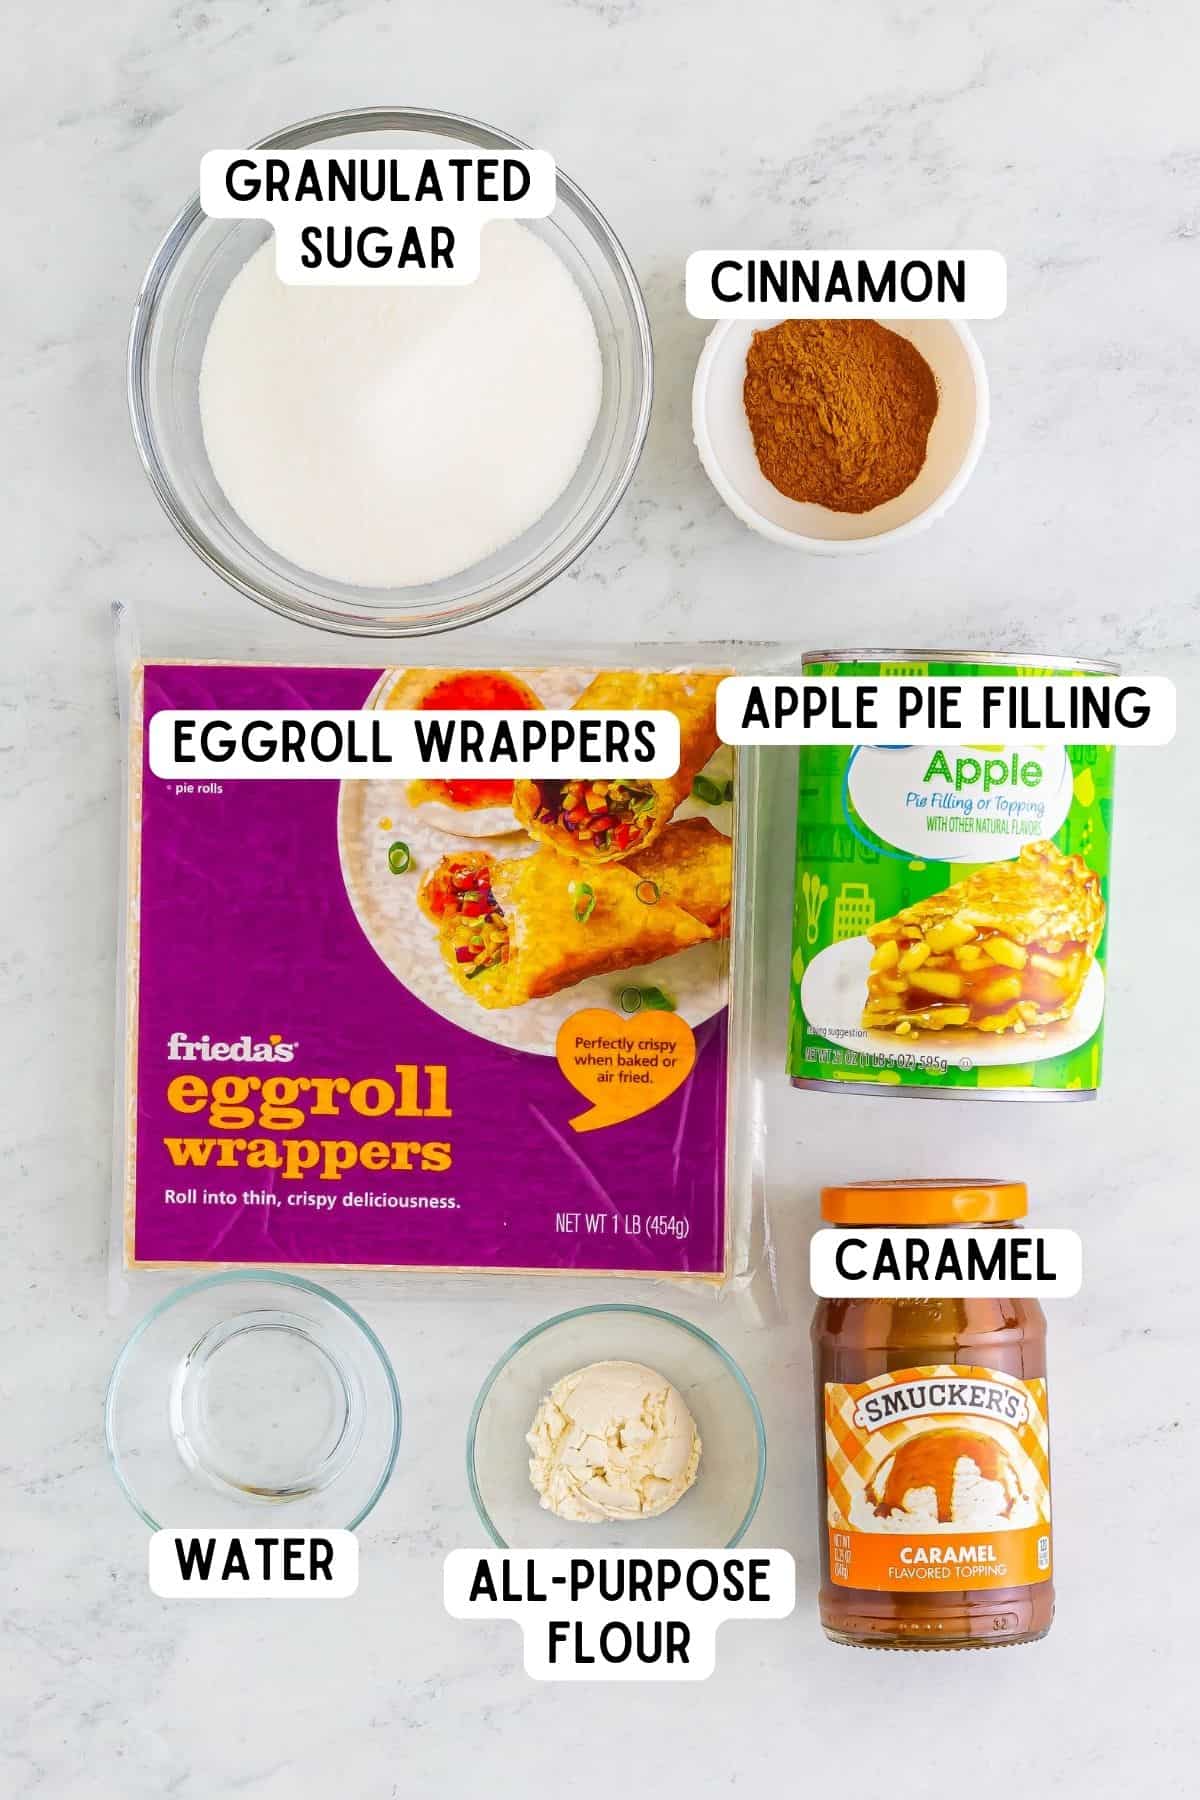 granulated sugar, ground cinnamon, water, flour, package of egg roll wrappers, can of apple pie filling, and jar of caramel.